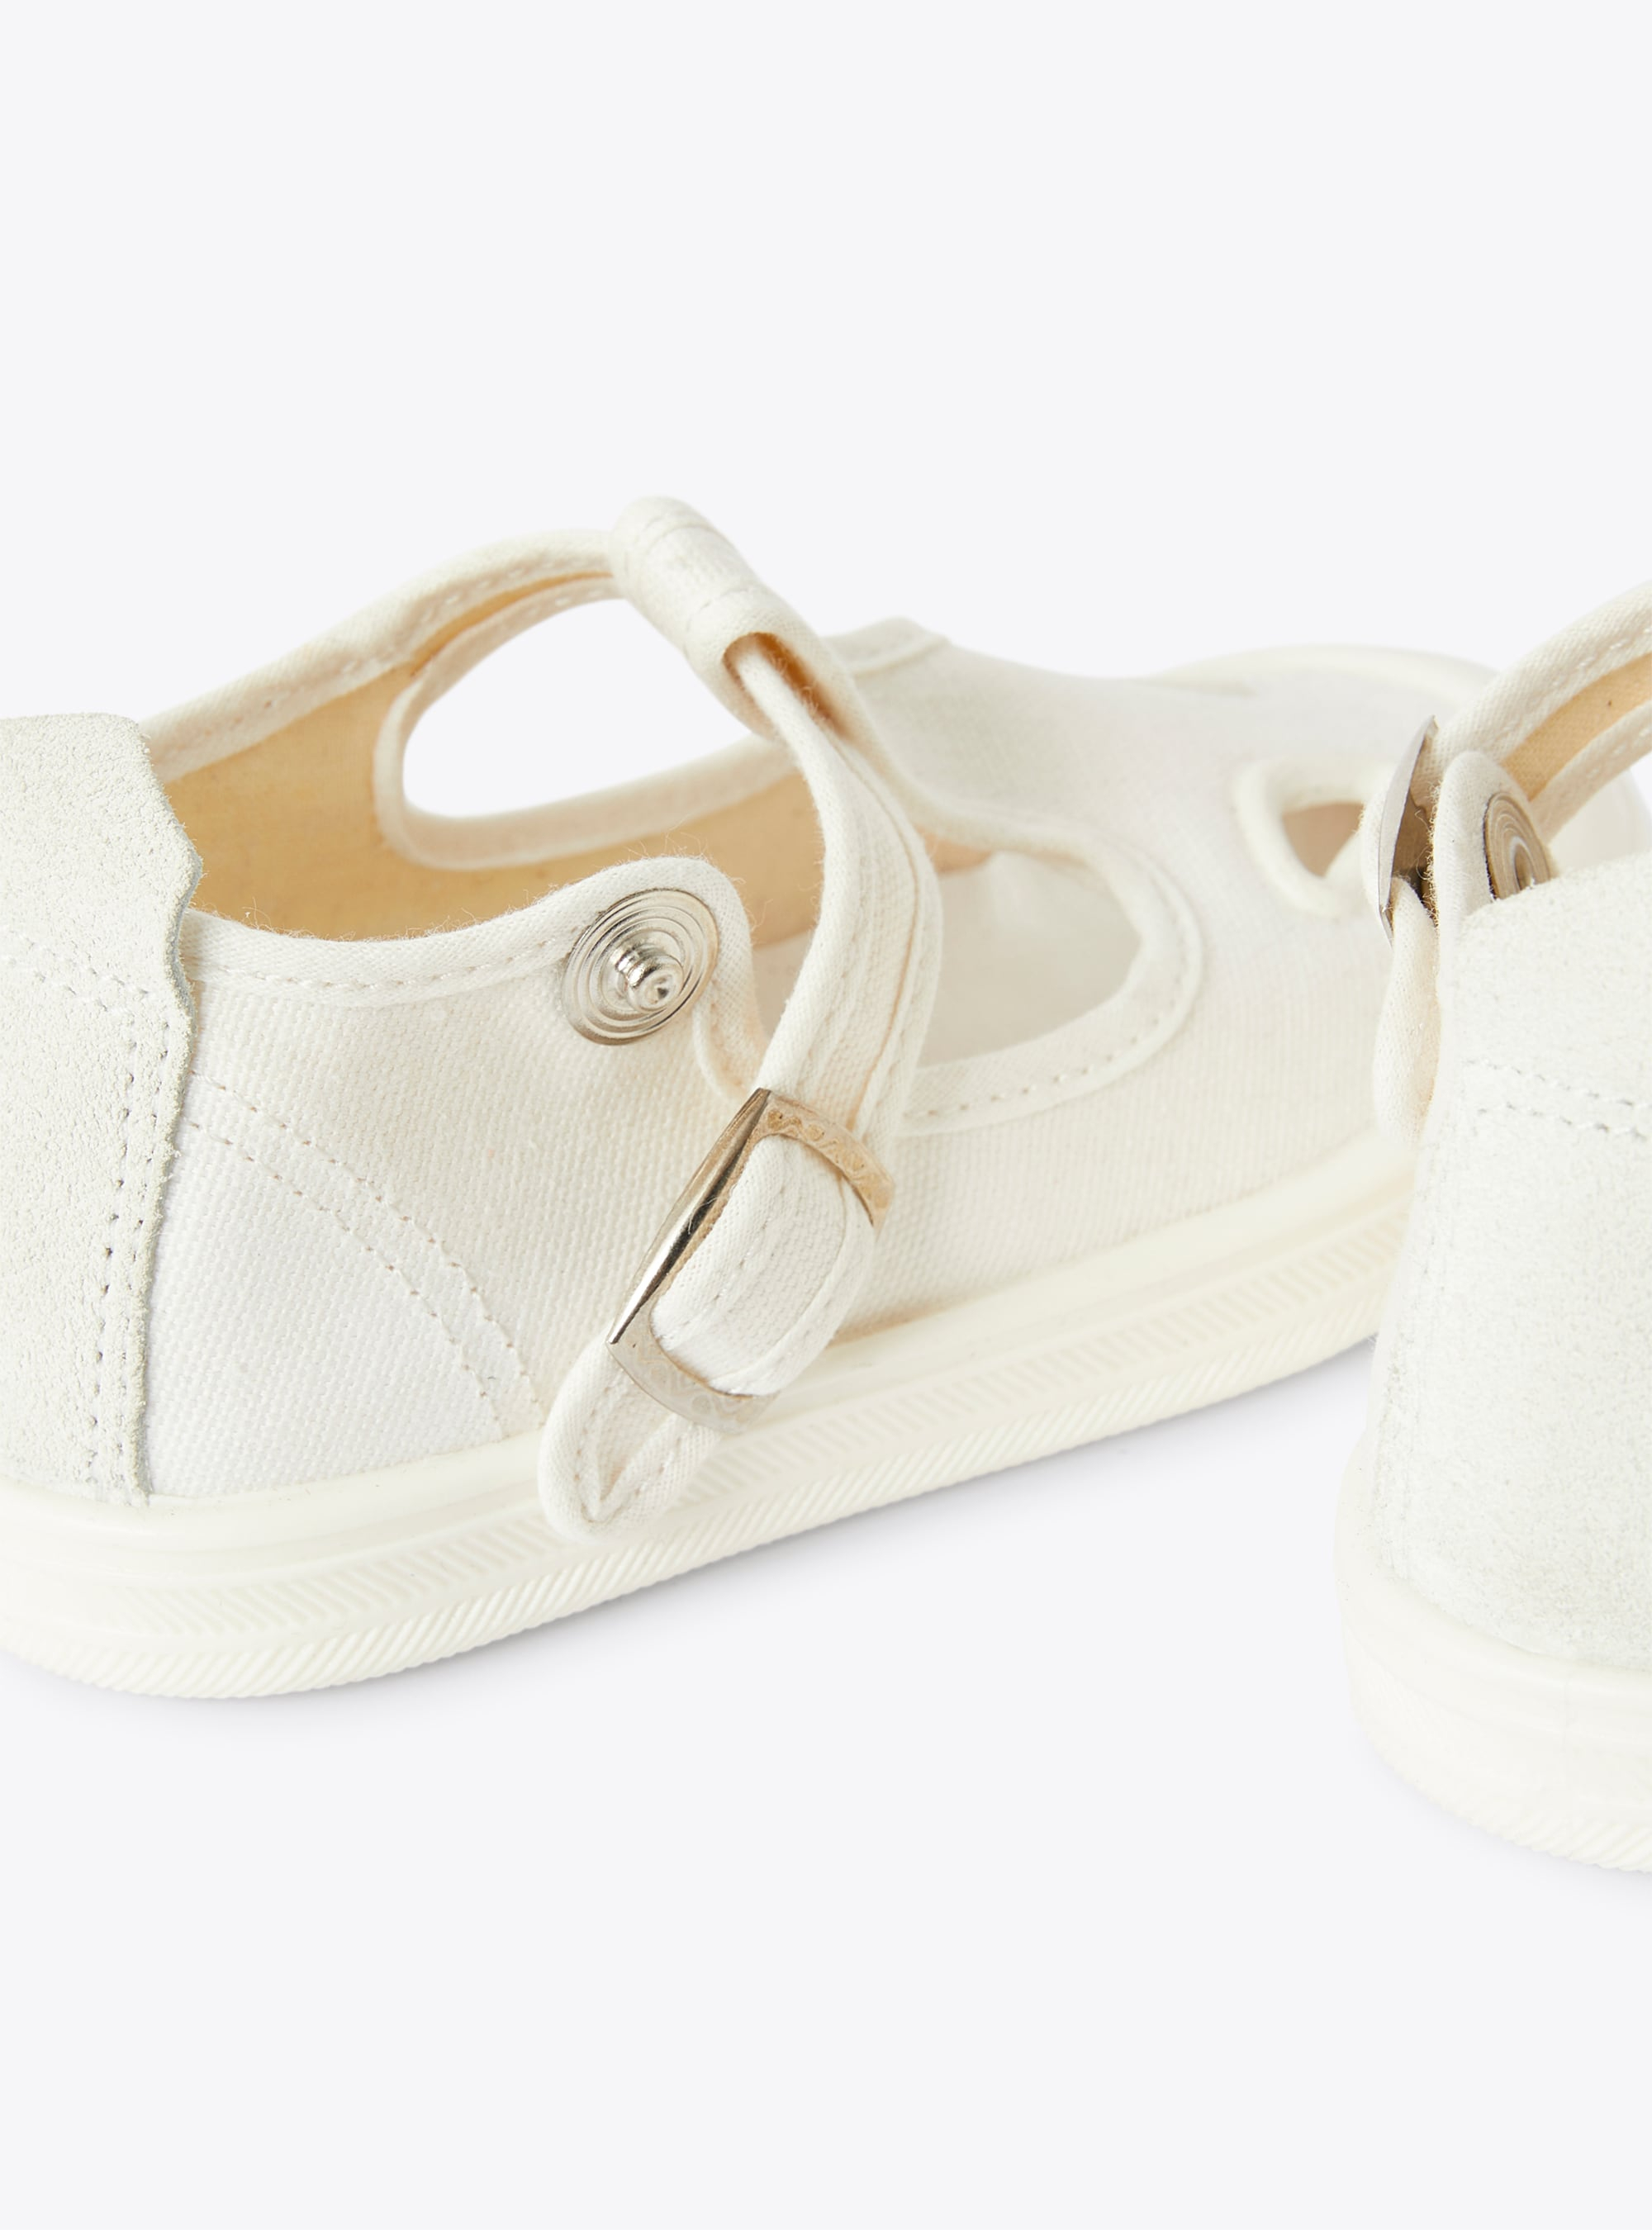 Sandal in white canvas with a t-bar design and decorative holes - White | Il Gufo